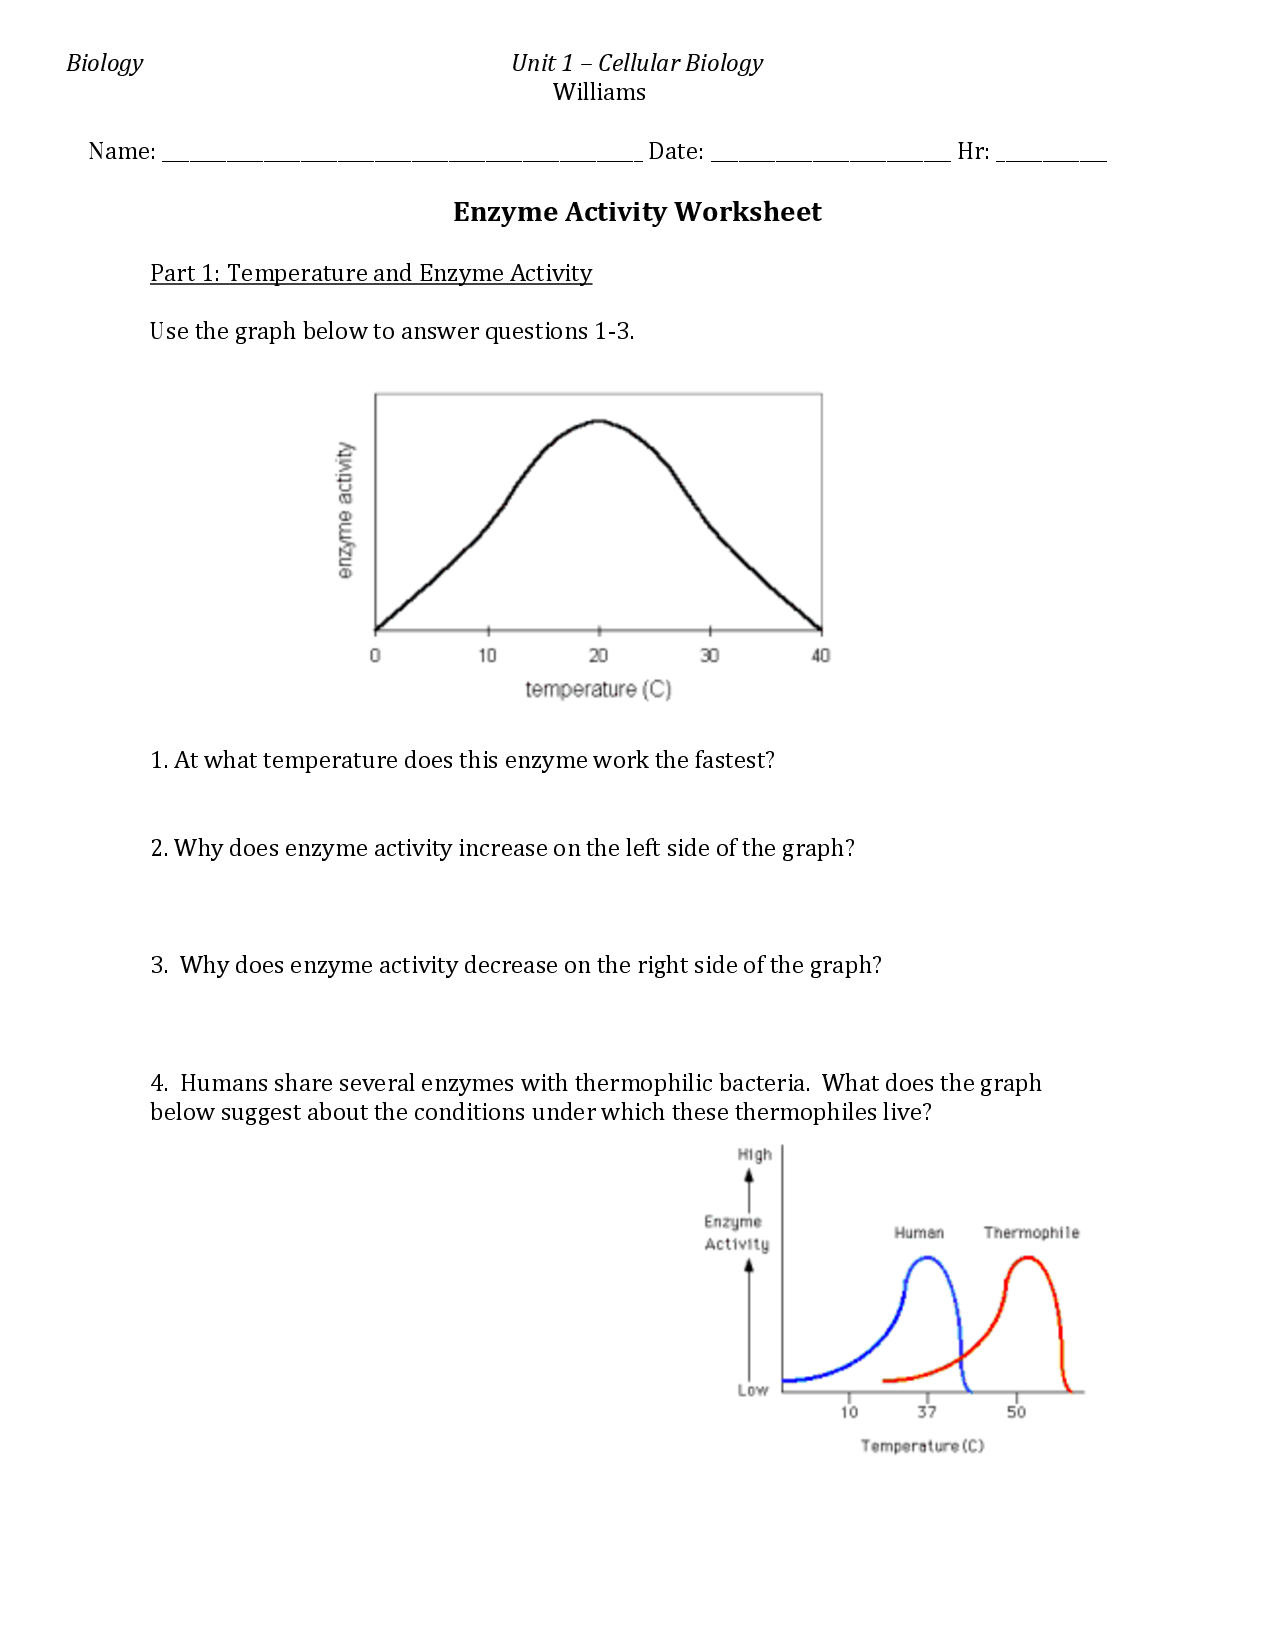 13-best-images-of-enzyme-practice-worksheet-answers-virtual-lab-enzyme-controlled-reactions